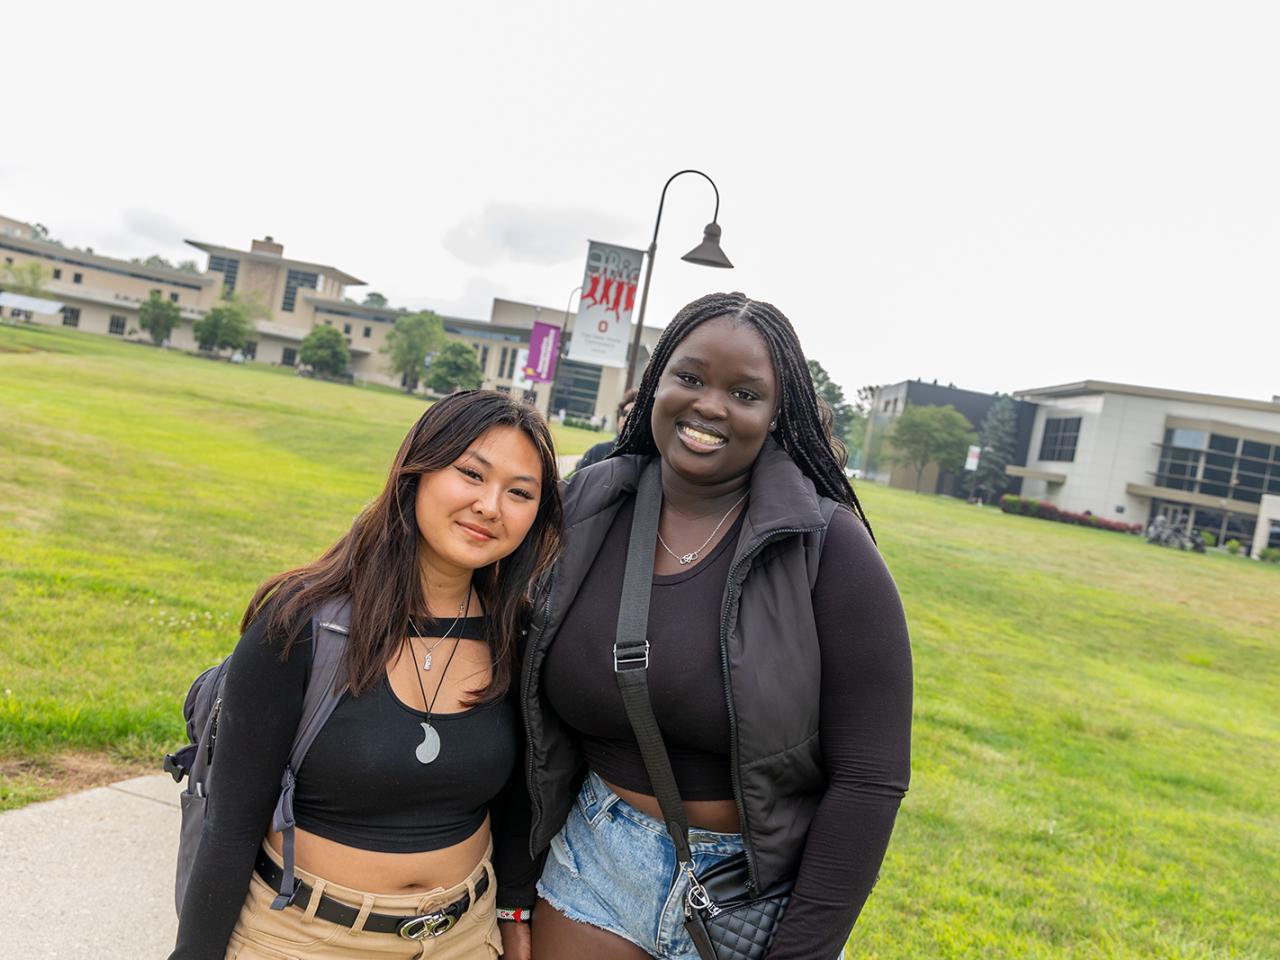 Two students stop to smile and pose for a photo on the campus lawn. 